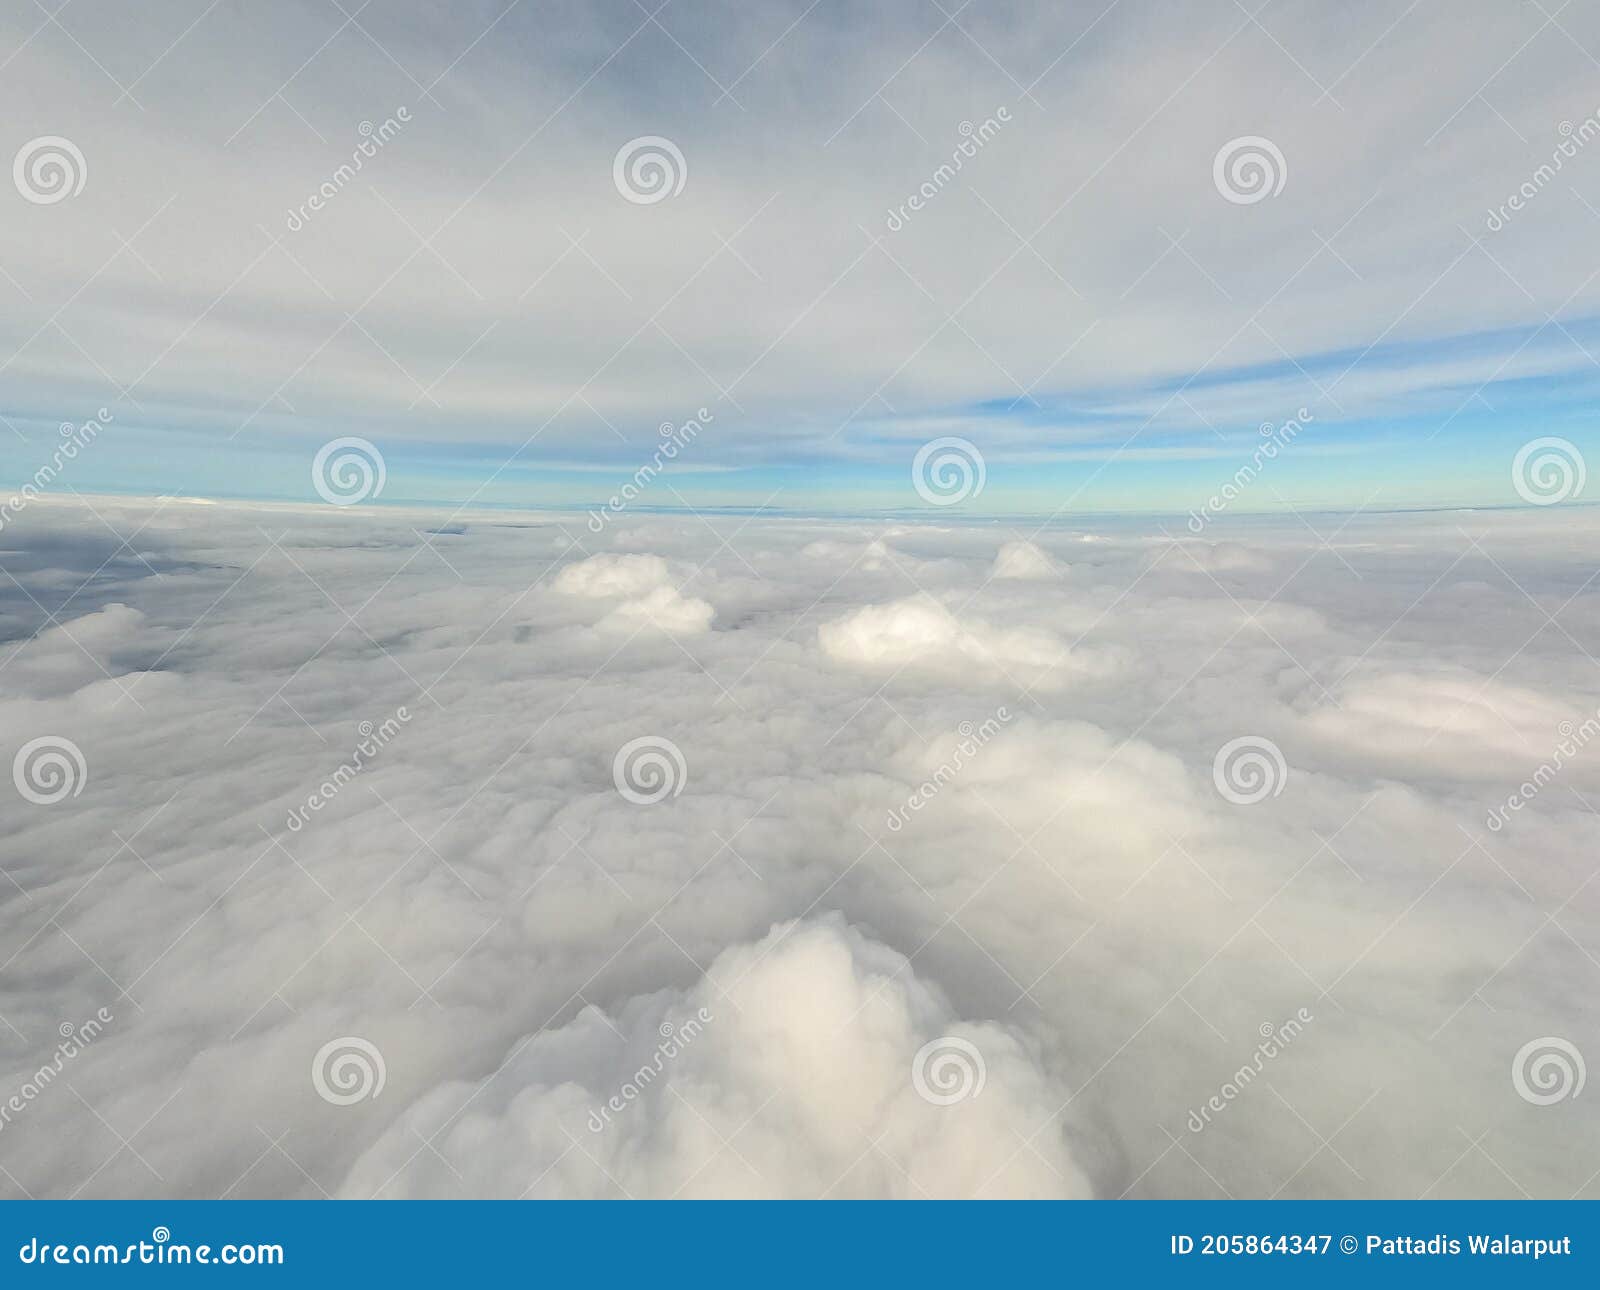 arial view from internal cabin of aeroplane.clouds in the sky and cityscapes though airplane window